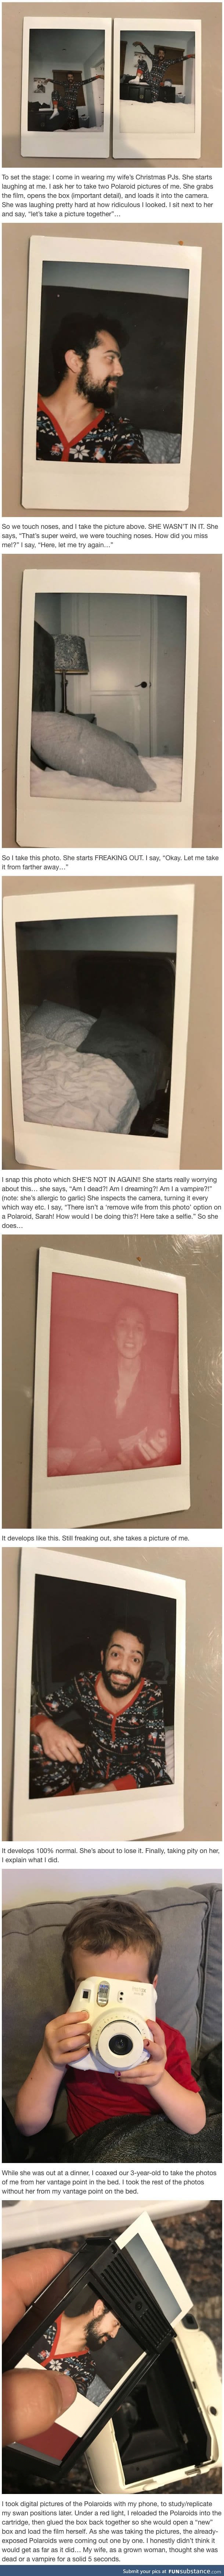 Man uses Polaroid picture prank on girlfriend showing her missing